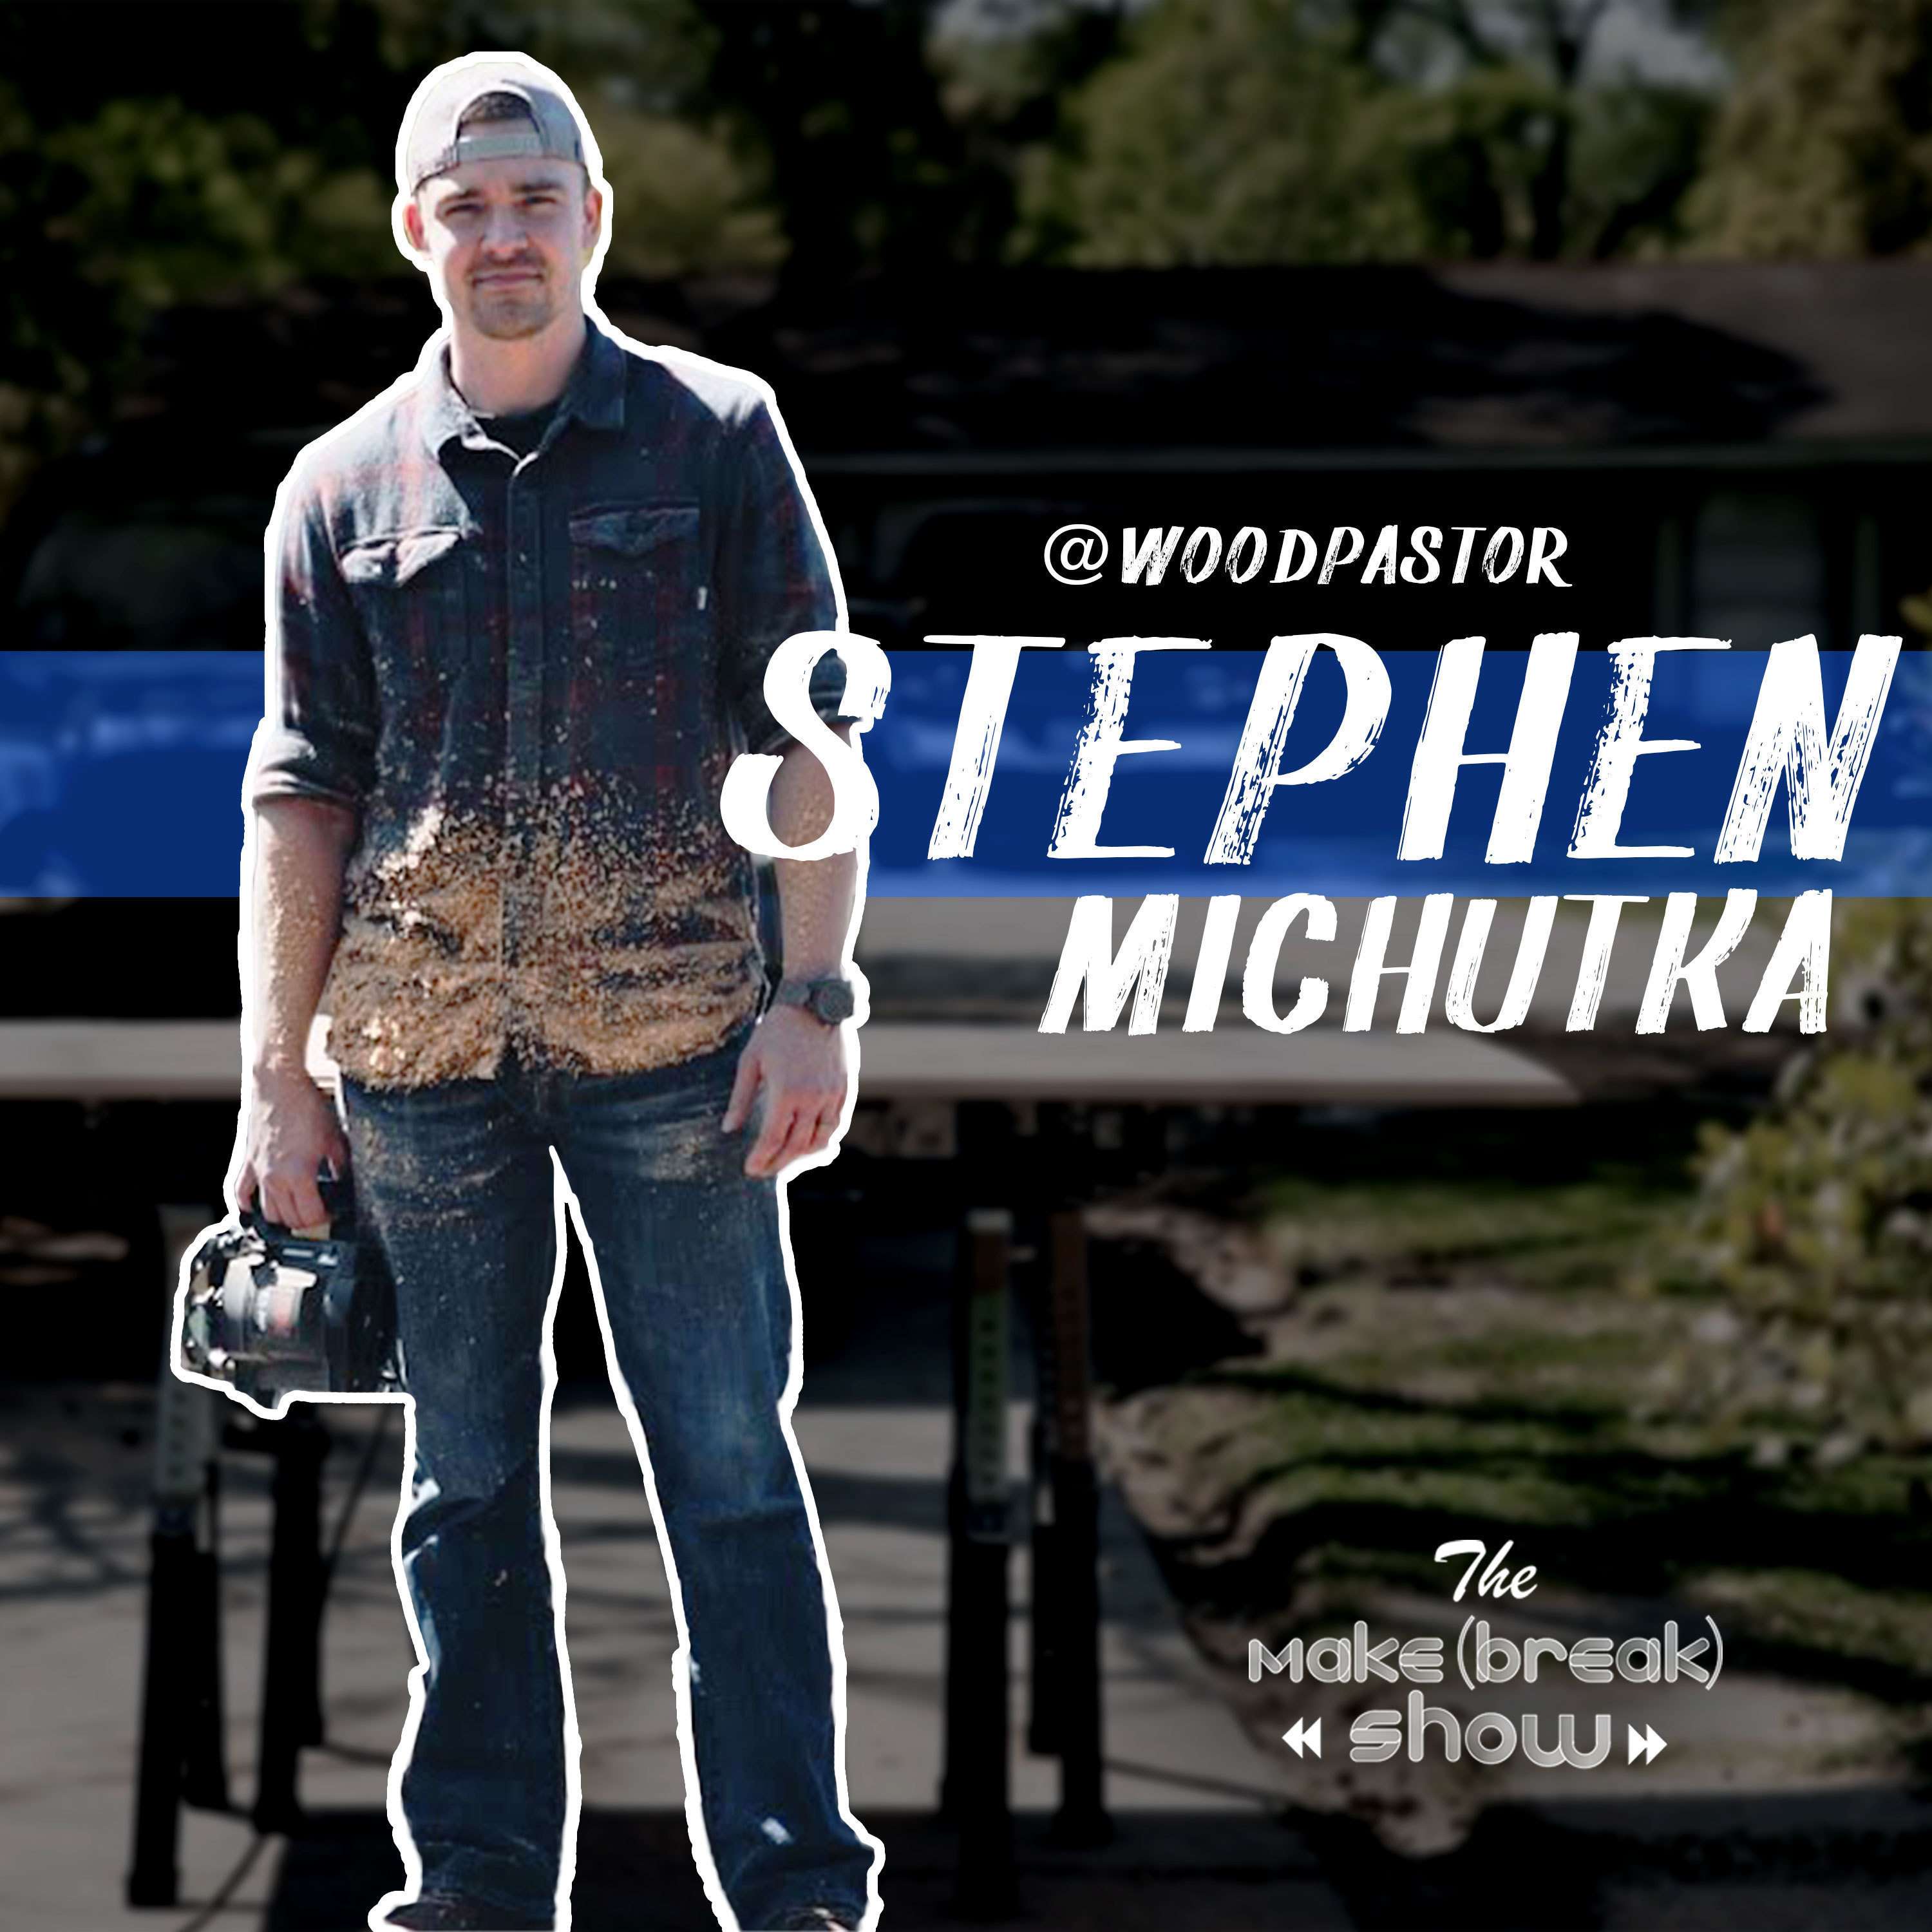 027: The Journey to Full-Time Woodworking with Stephen Michutka (The Wood Pastor)